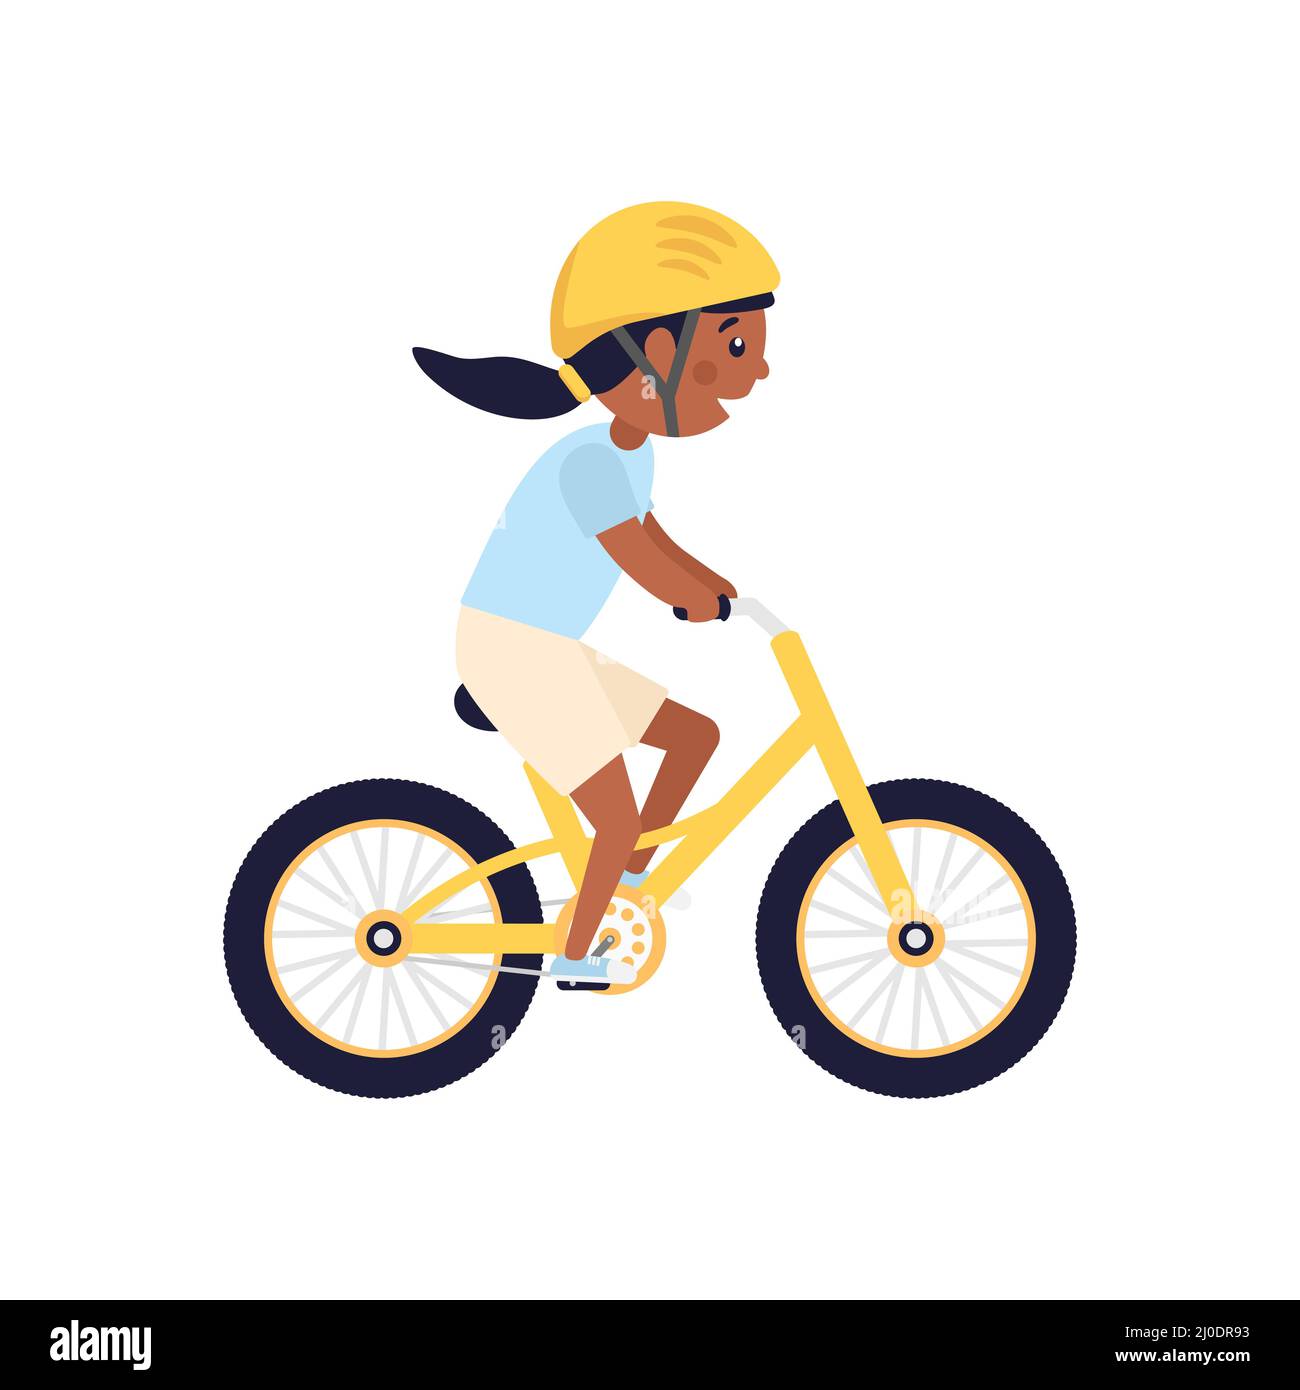 Cute happy American girl with yellow helmet riding bicycle. African child rides modern bike. Stock Vector